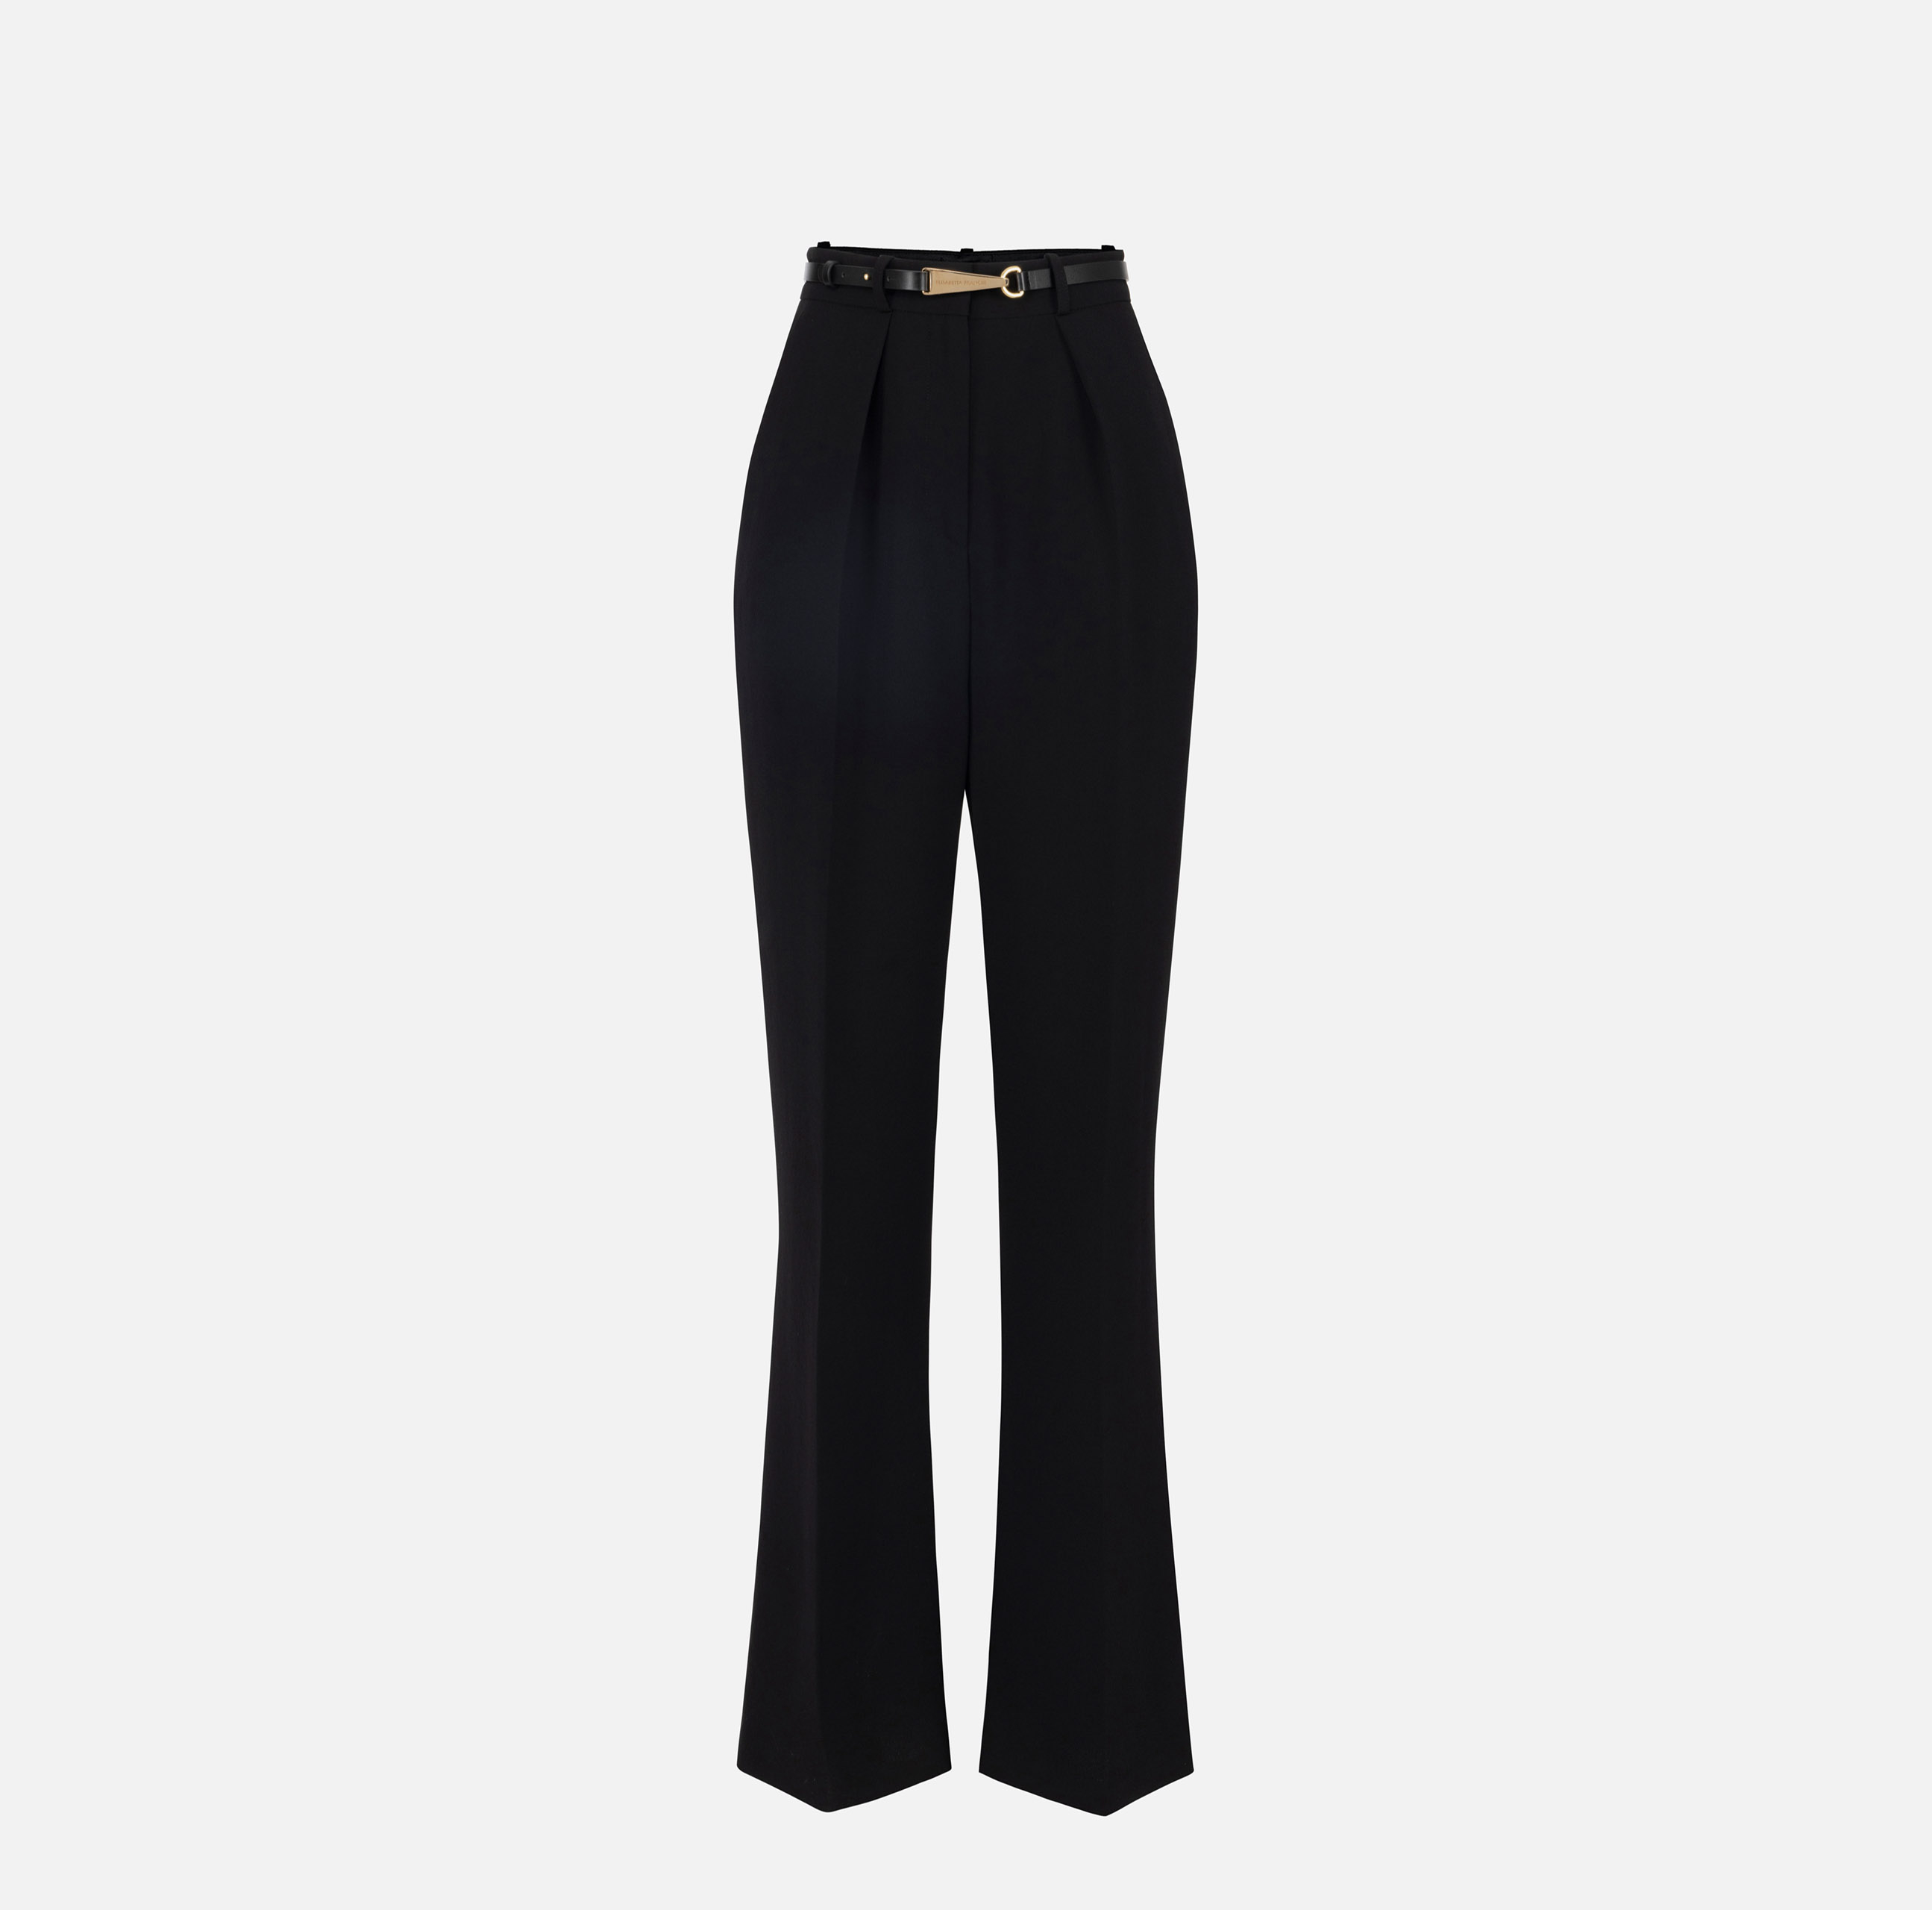 Straight trousers in lightweight crêpe fabric with snap hook - ABBIGLIAMENTO - Elisabetta Franchi